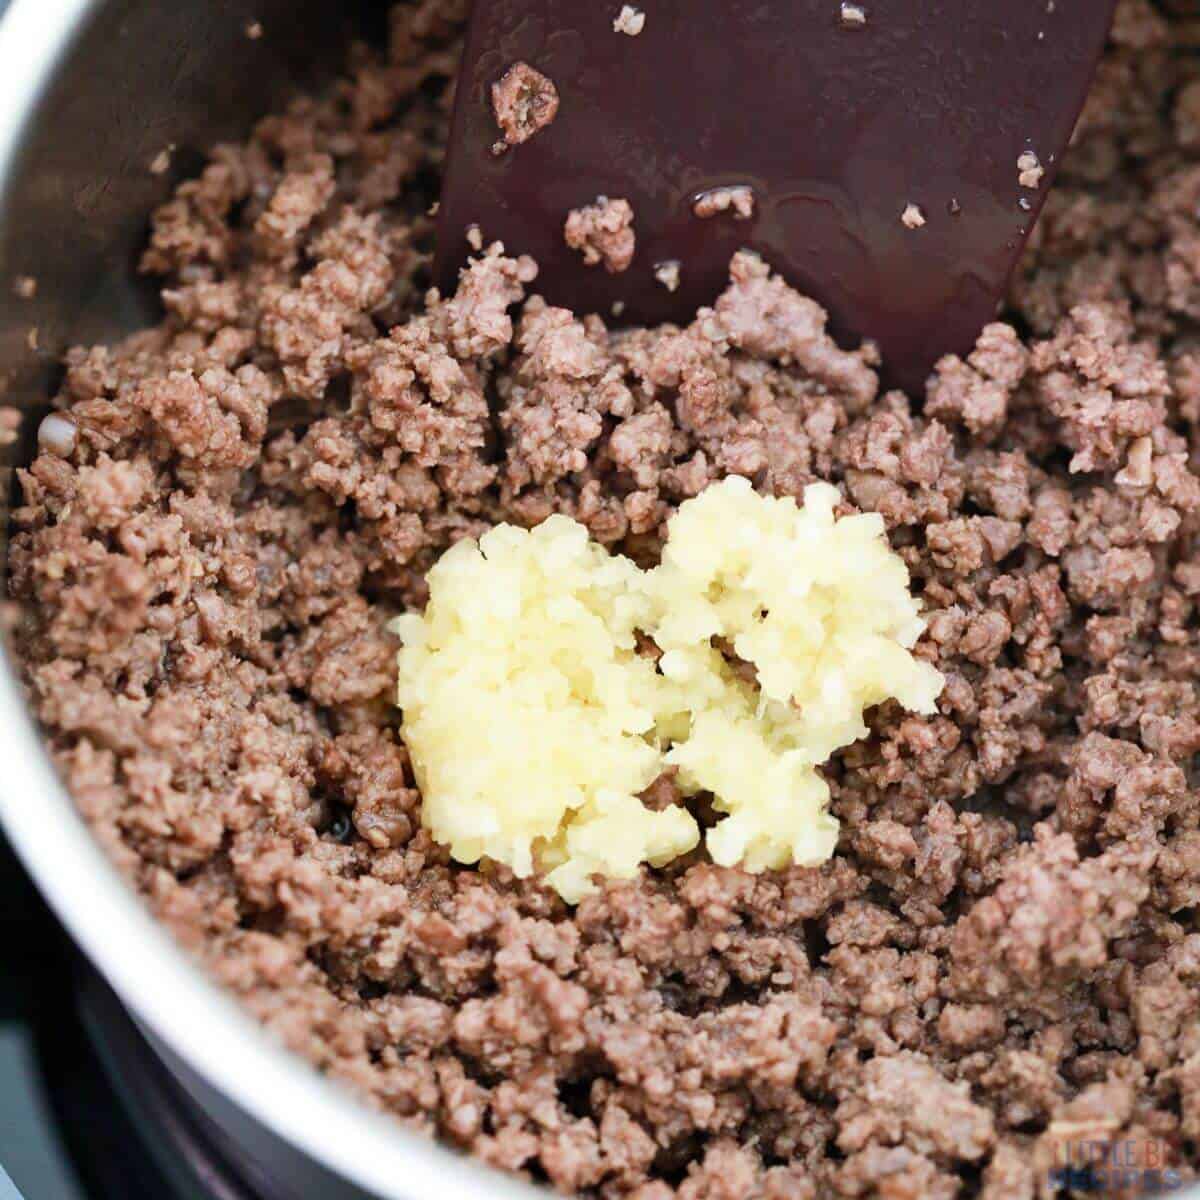 minced garlic added to browned ground beef.